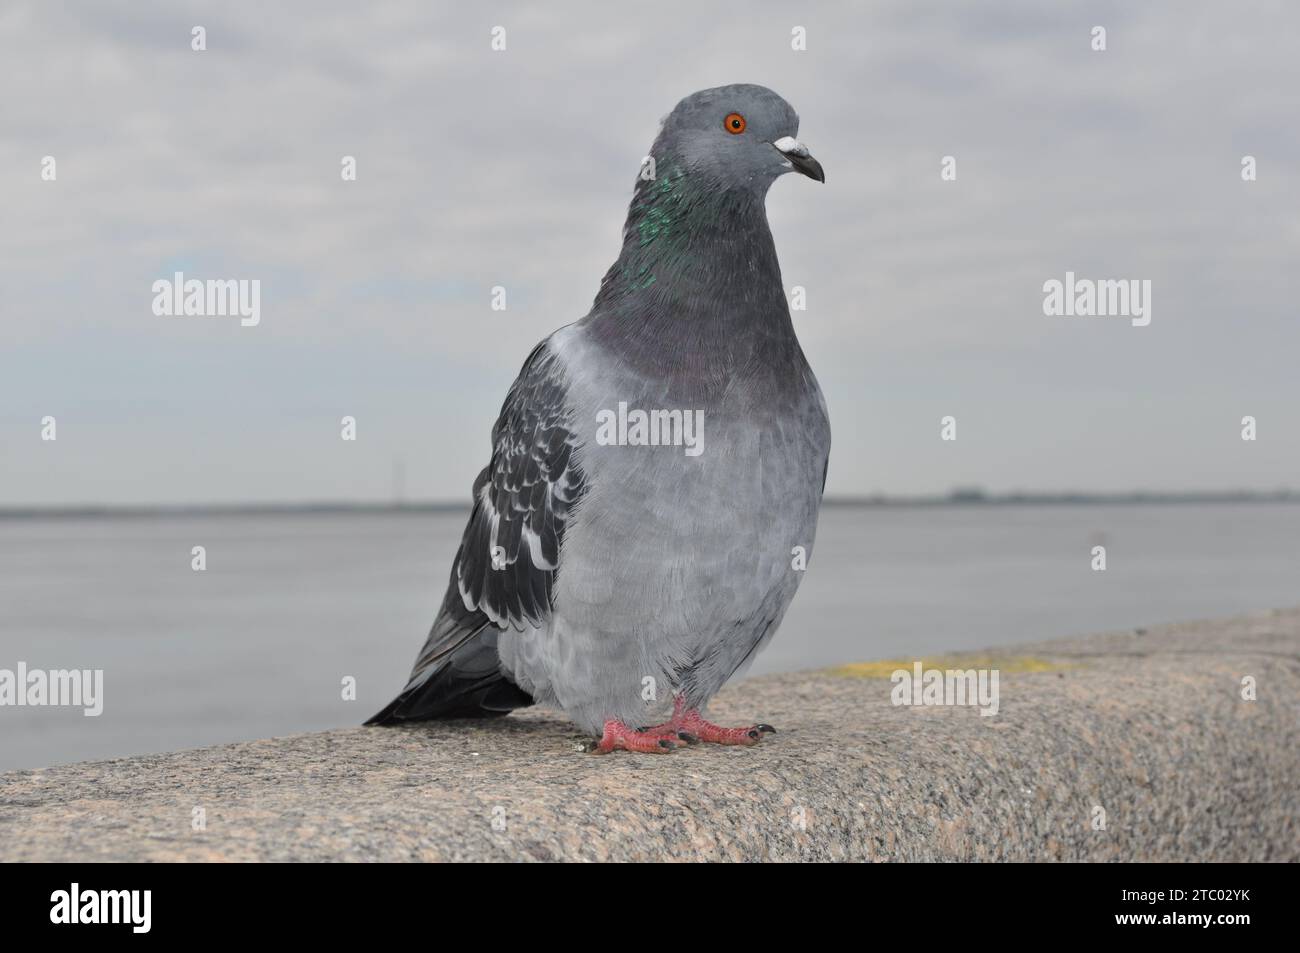 A dove sits on a granite pedestal Stock Photo